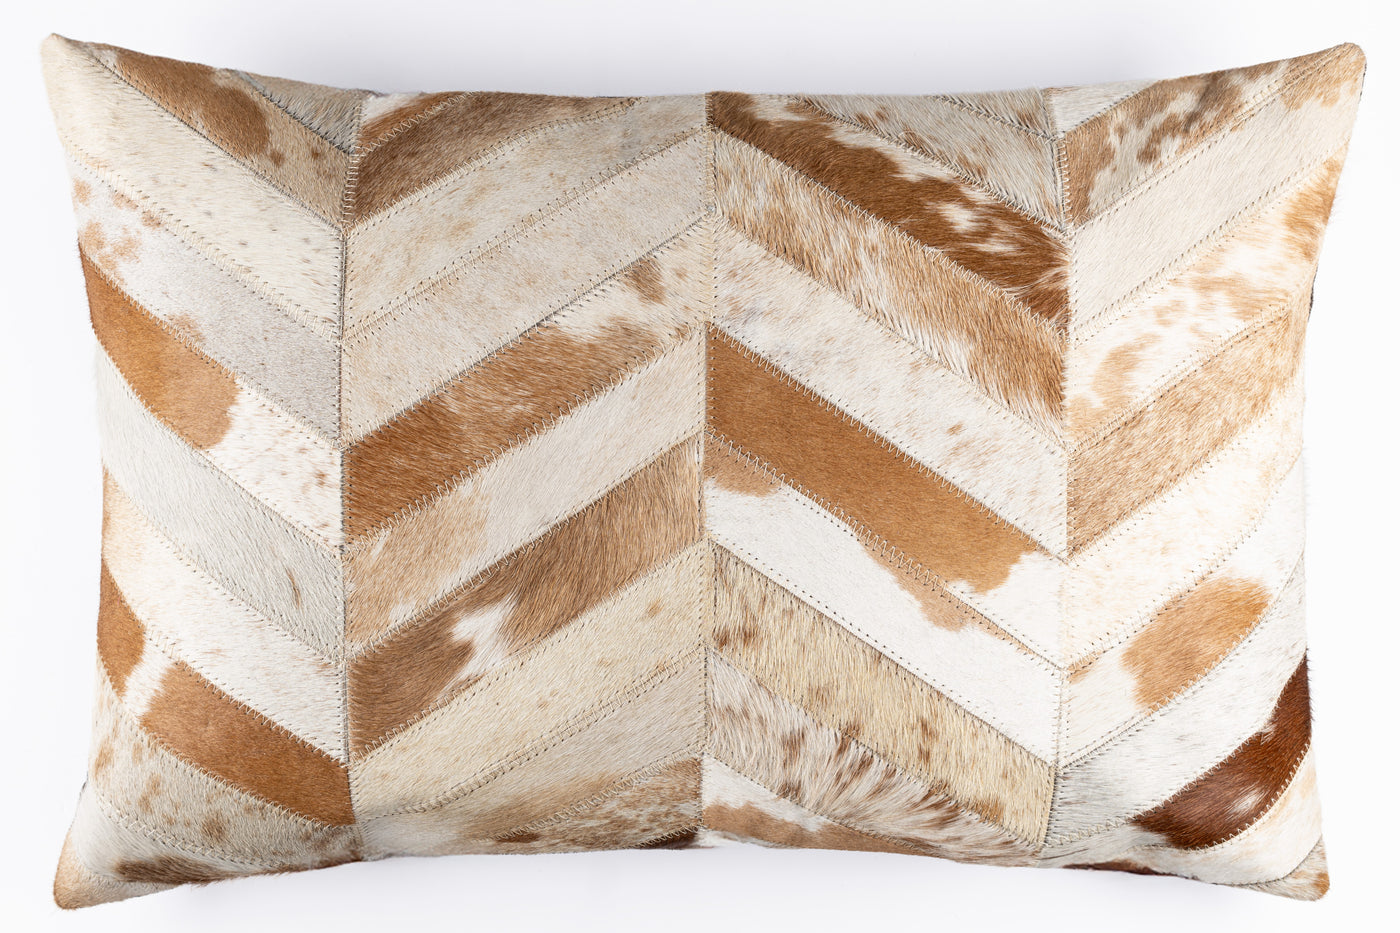 Canvello Genuine Cowhide Leather Decorative Throw Pillows - Handmade Patchwork Boho Accent Pillows For Sofa, Couch, Bed, Chair - Western Southwestern Farmhouse Pillow Covers With Feather Down Insert Included